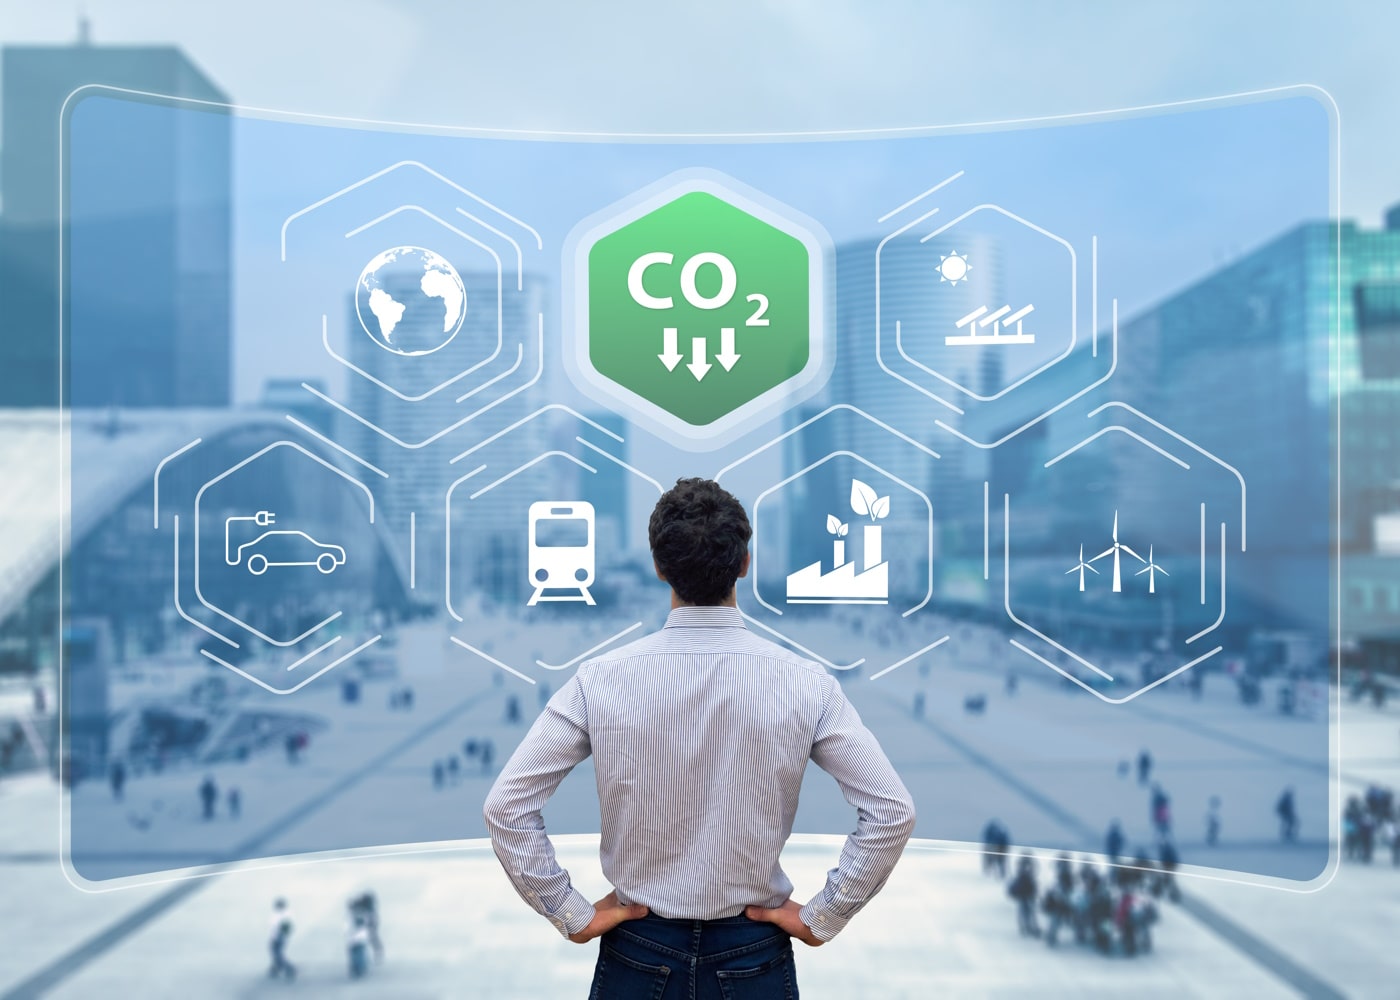 Unleashing Universal Data from Reporting to Decarbonization